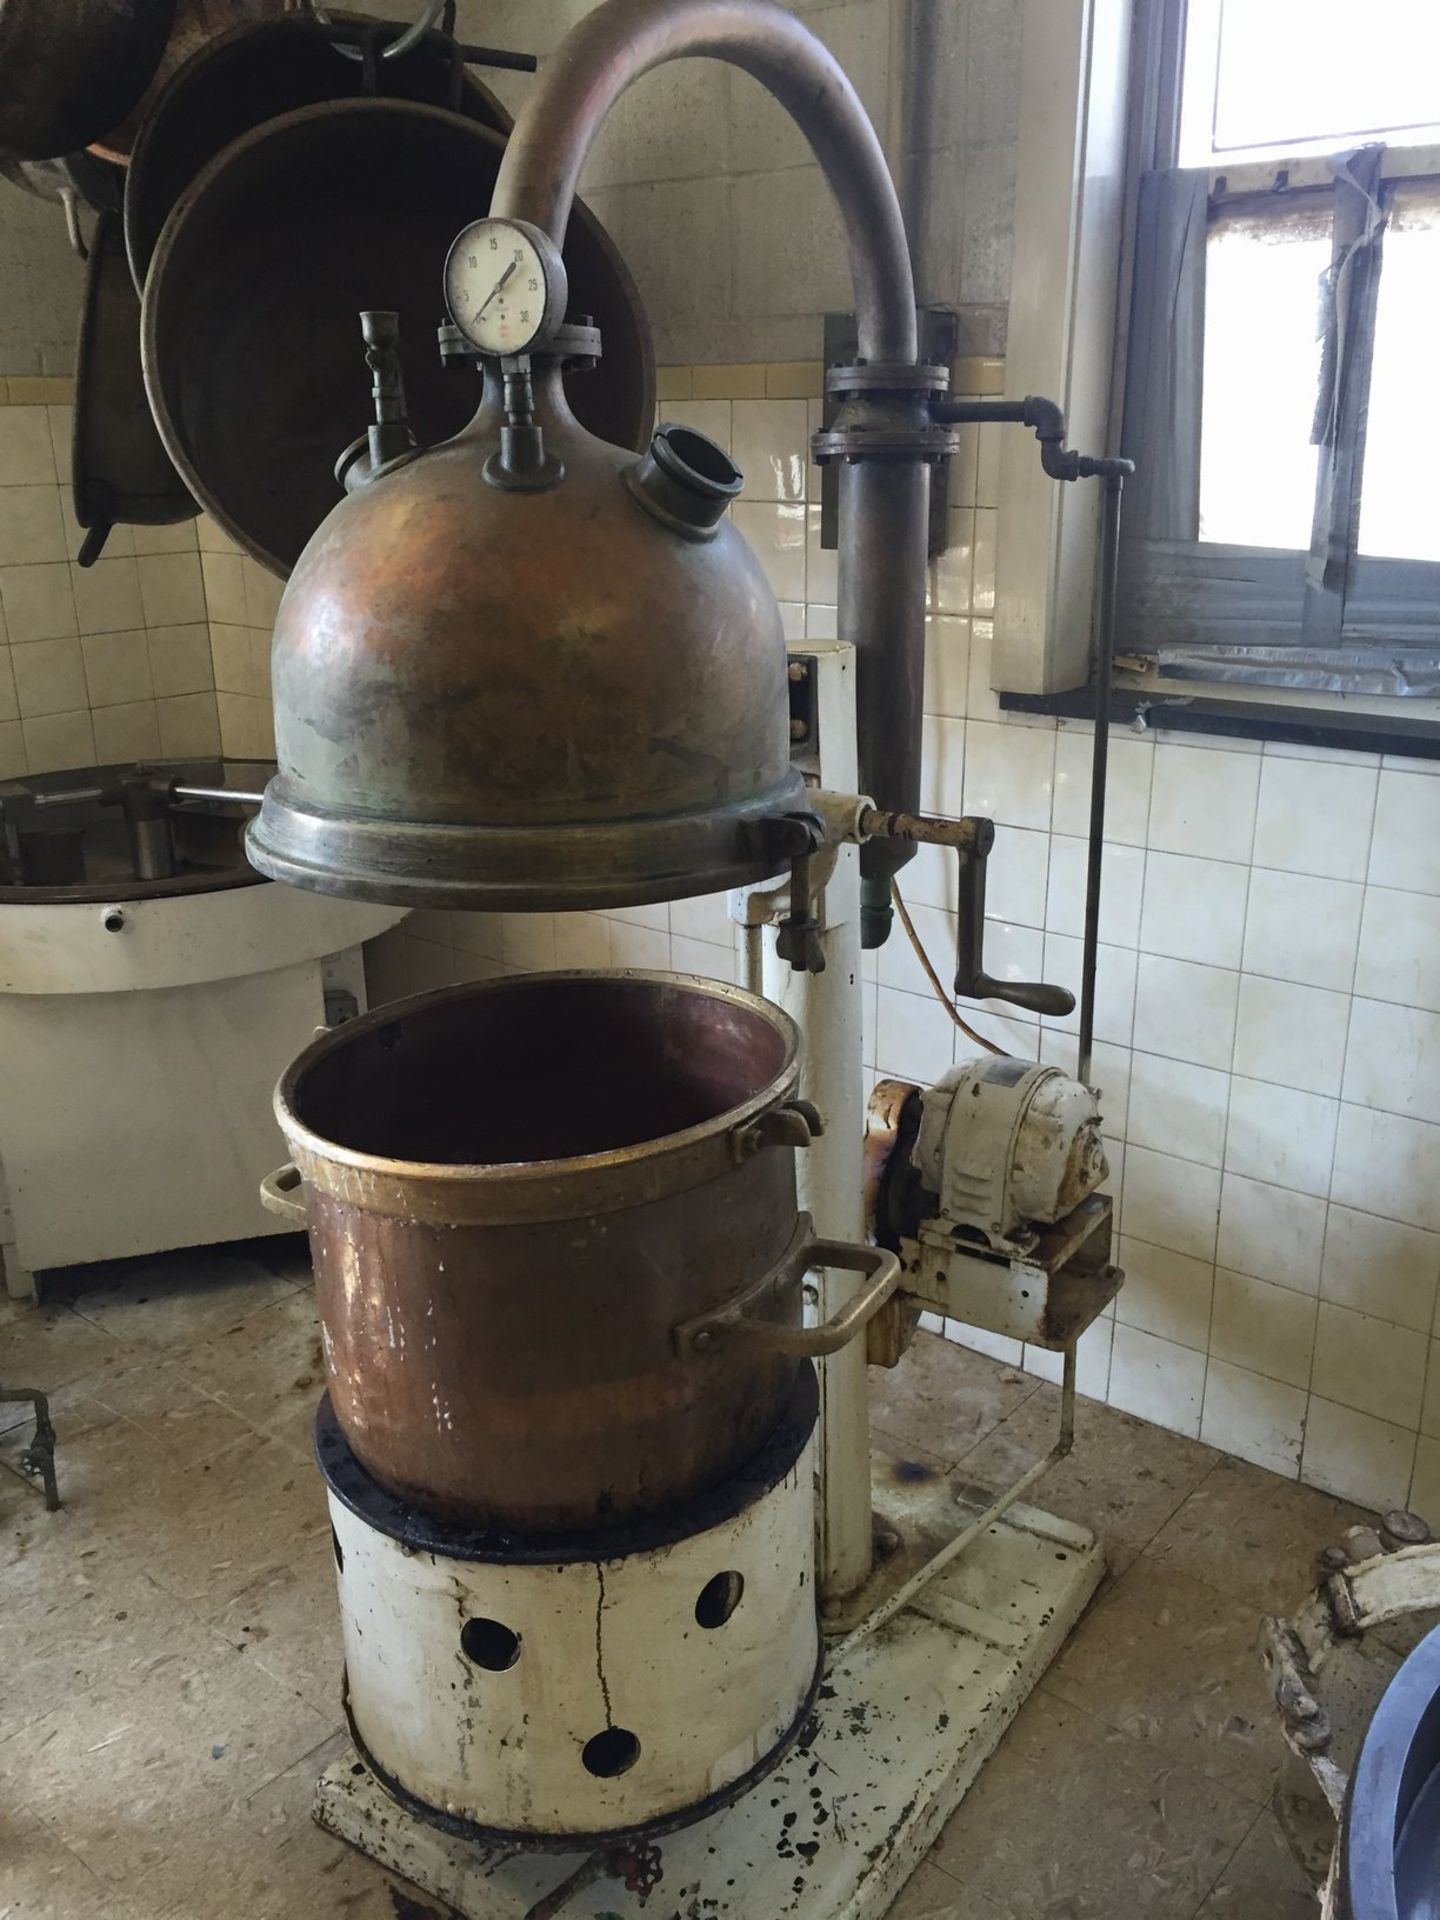 Simplex Gas Fired Vacuum Hard Candy Cooker with copper dome and pot, vacuum pump missing burner